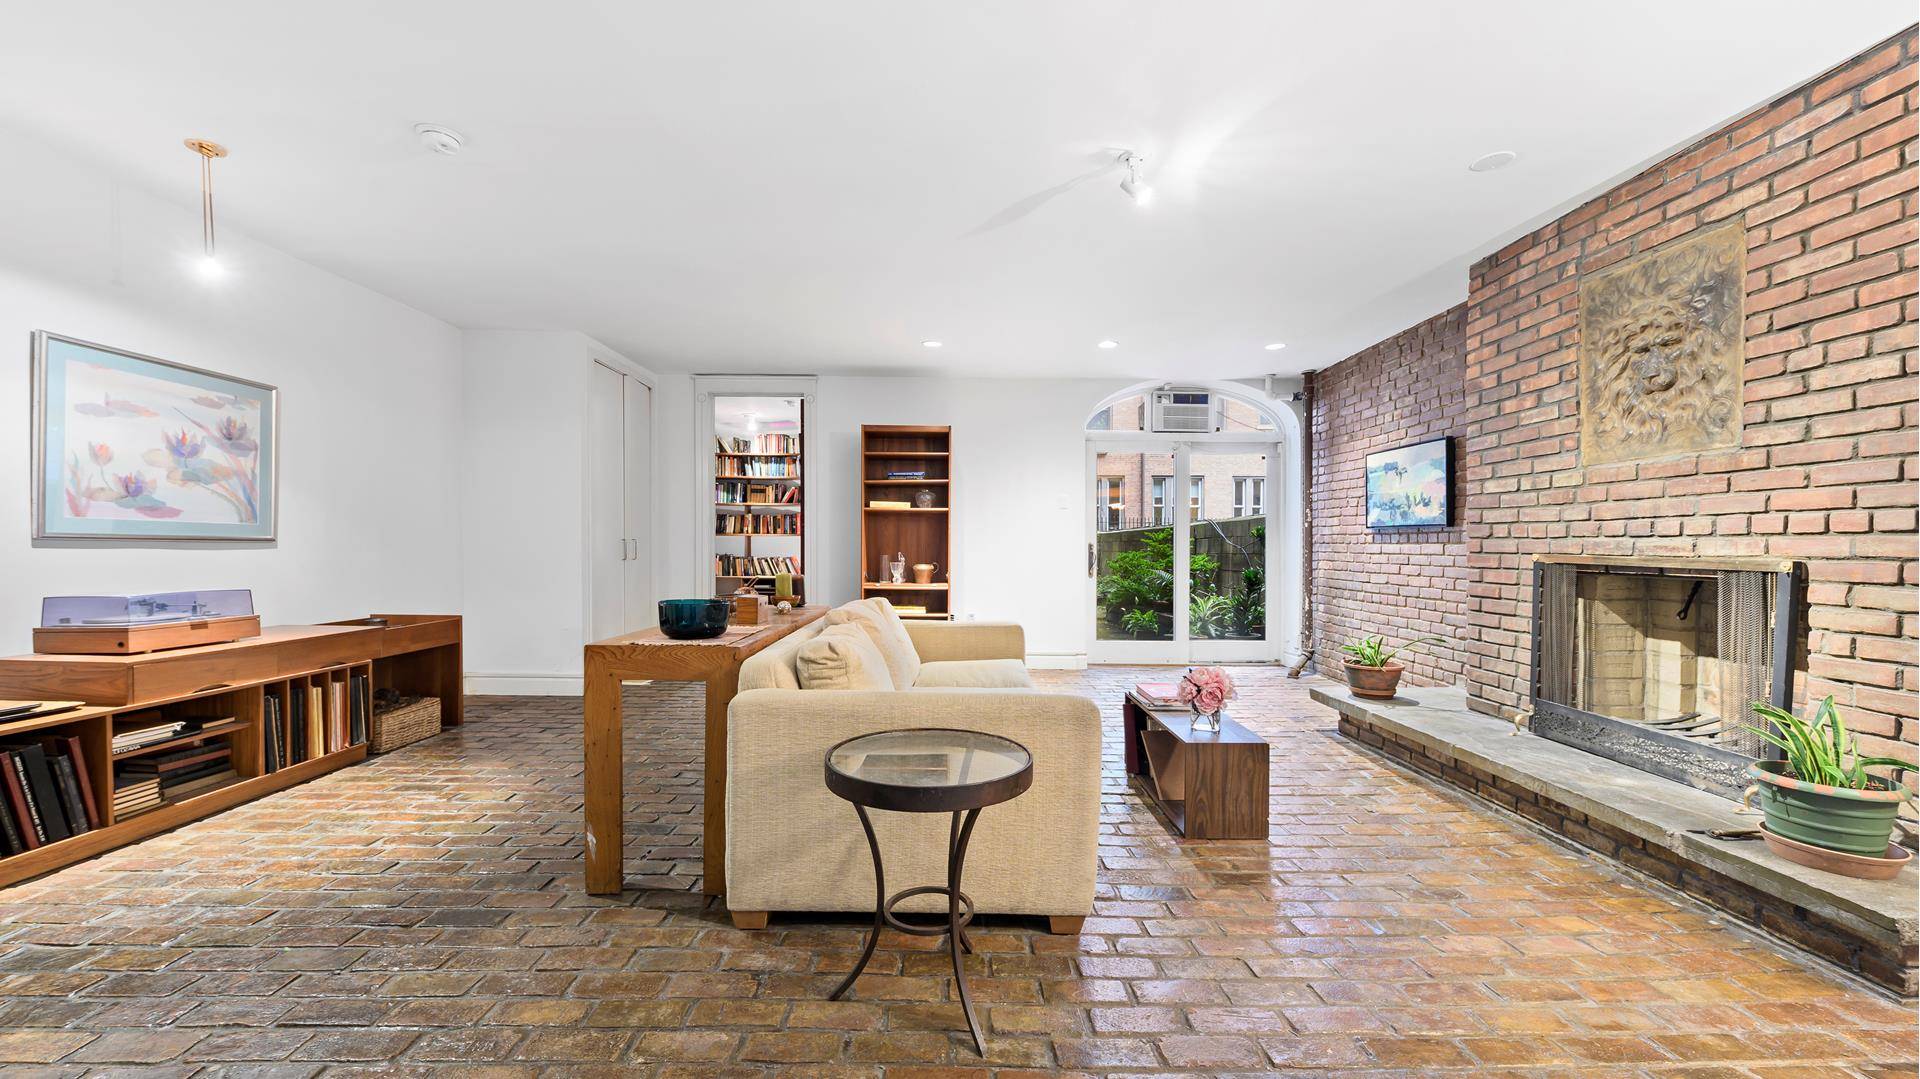 This generously sized, garden level duplex apartment is located in a boutique coop building on one of the Upper West Side's most picturesque blocks.